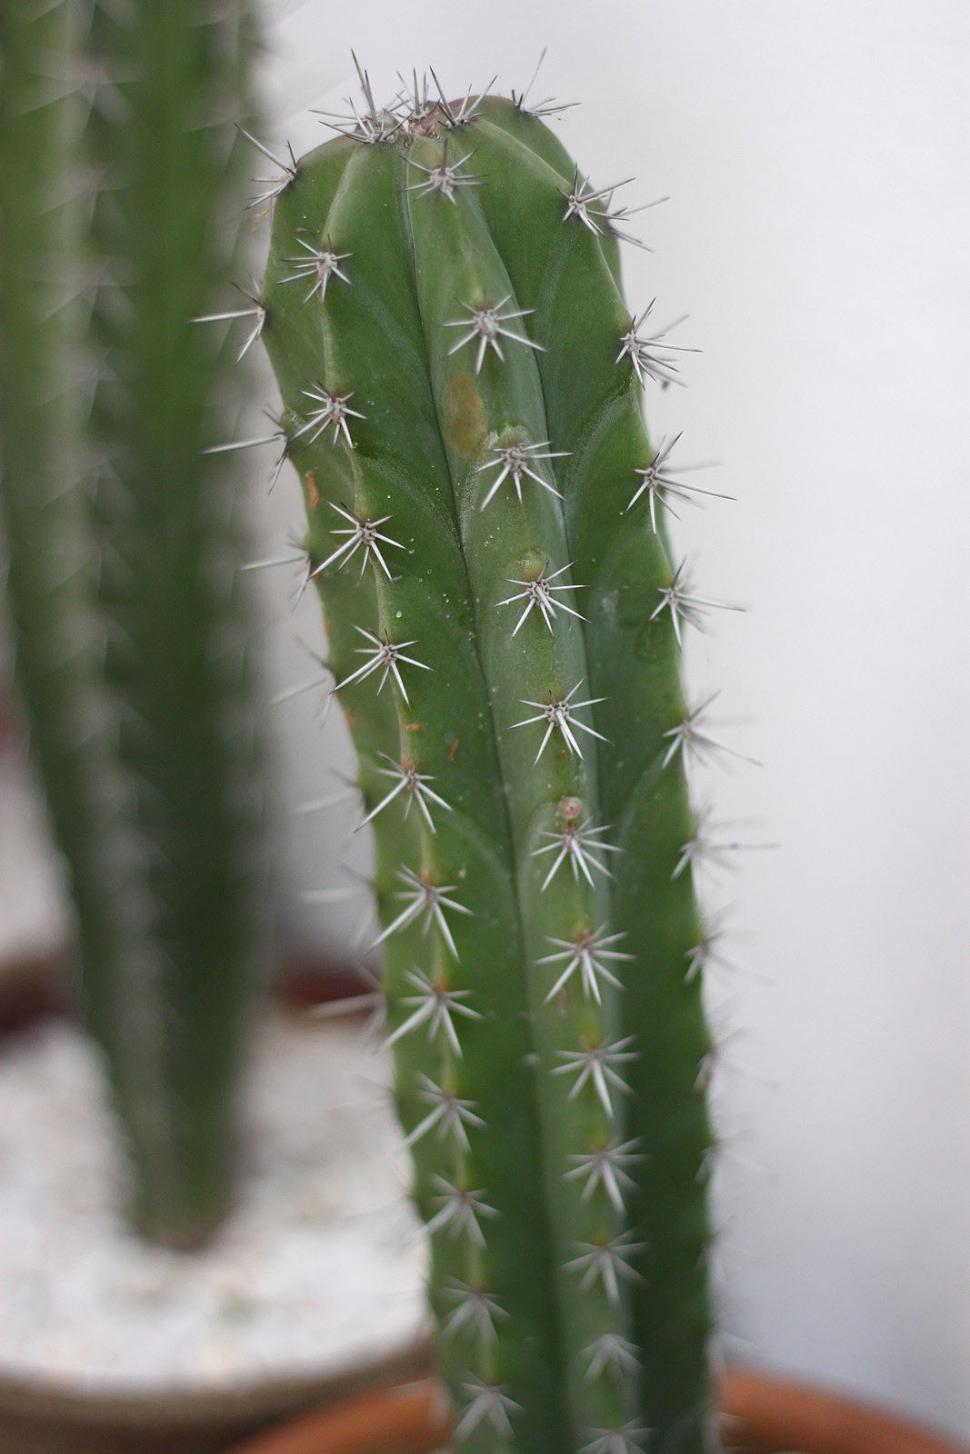 Free Image of Close Up of Cactus in Pot 